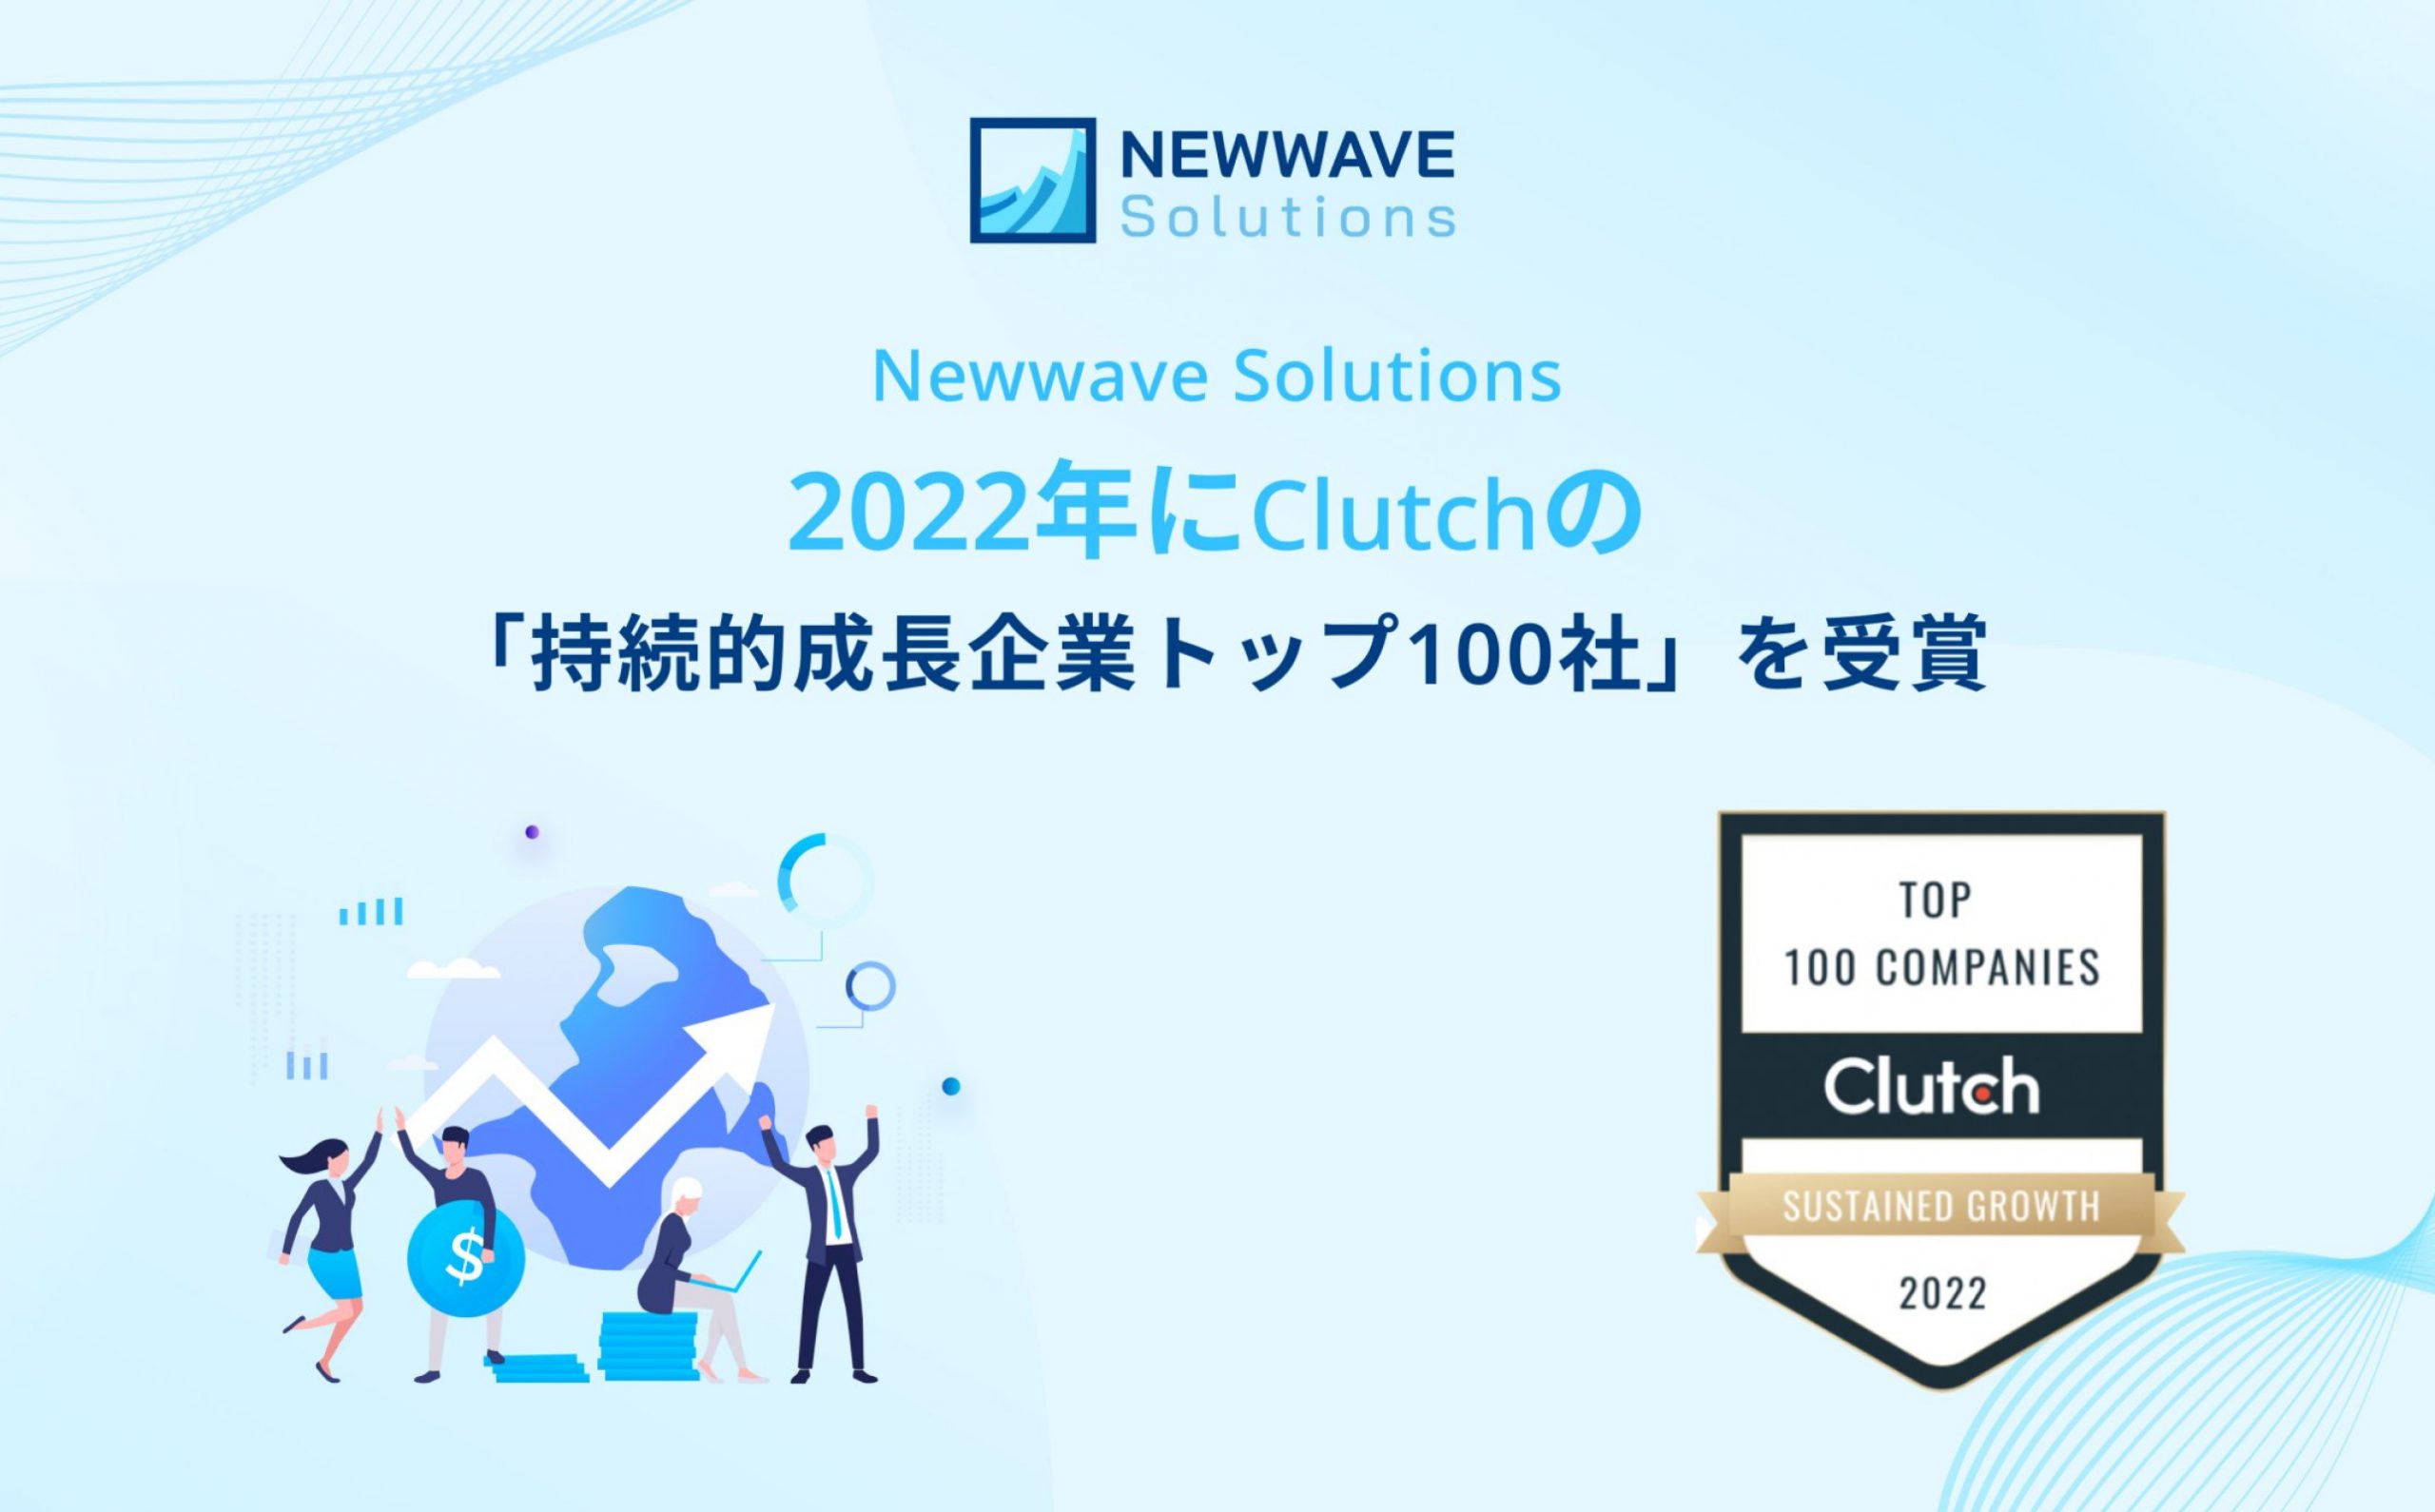 Newwave Solutions Clutch 2022